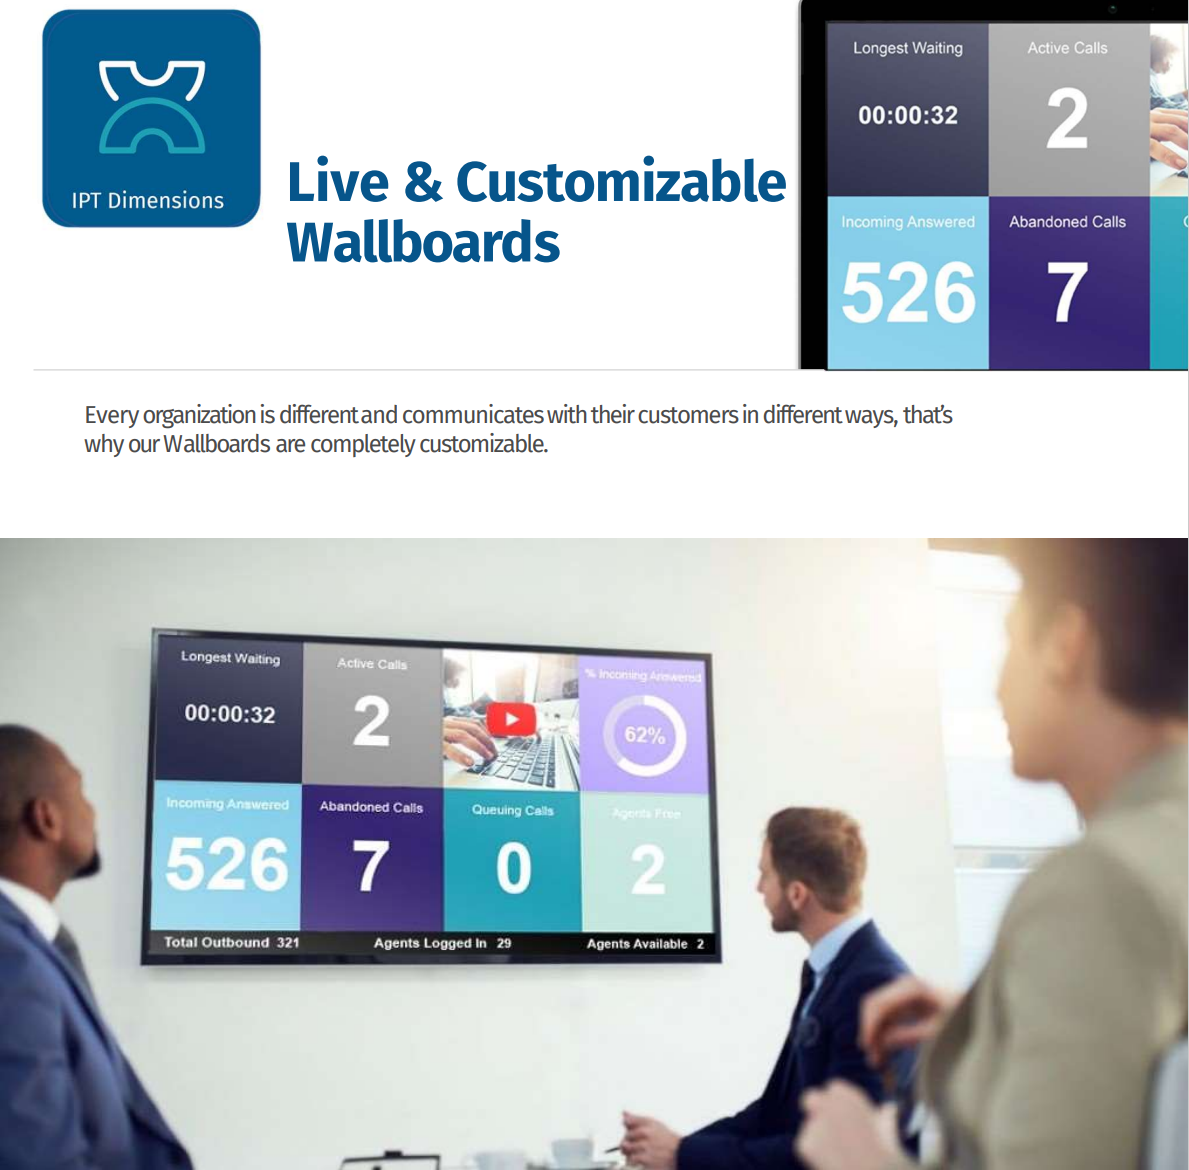 IPT Dimensions live & customizable wallboards